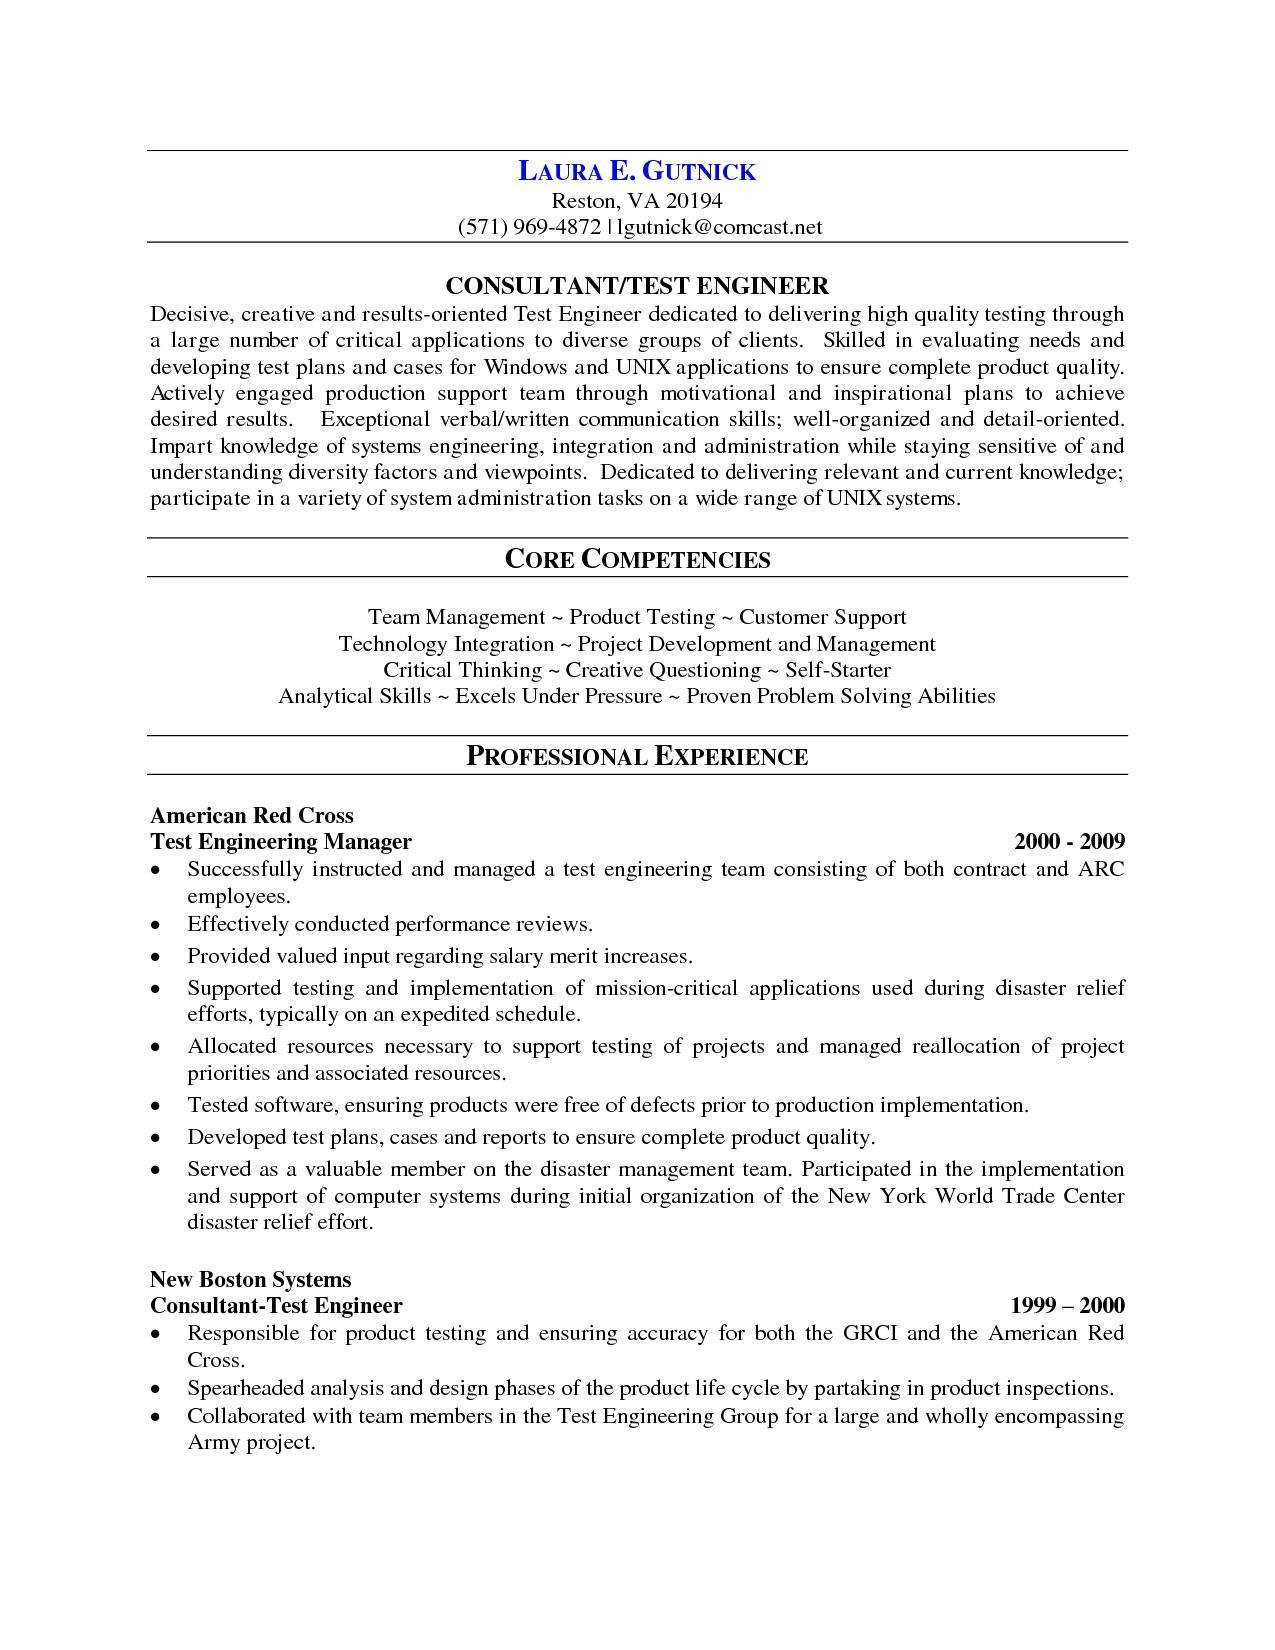 Sample Resume for 2 Years Experience In Manual Testing Sample Resume for software Tester 2 Years Experience